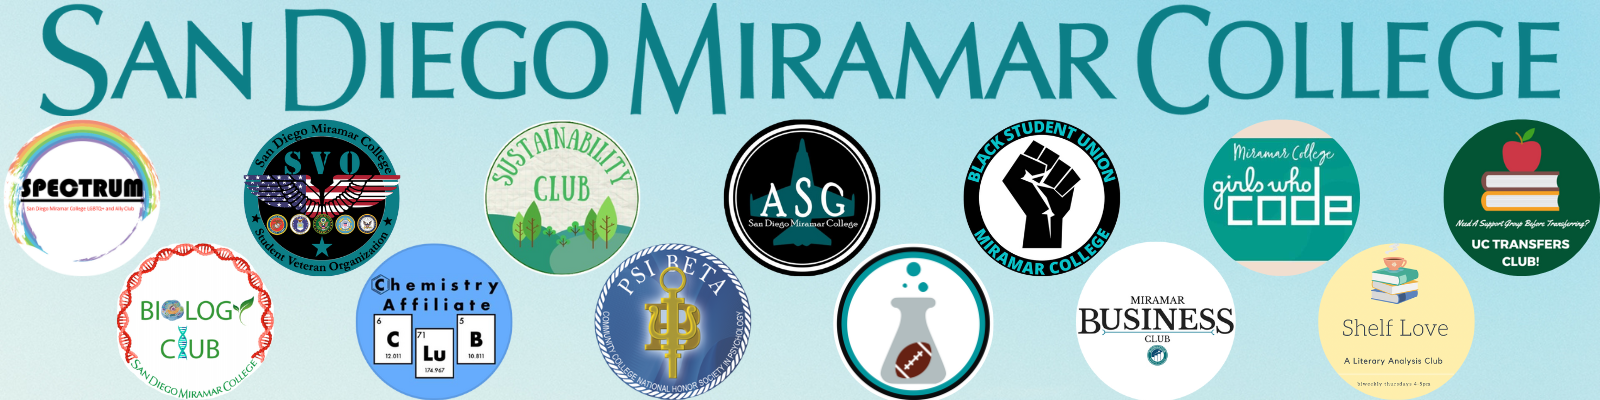 A collection of student club logos displayed for decoration under the San Diego Miramar College logo.